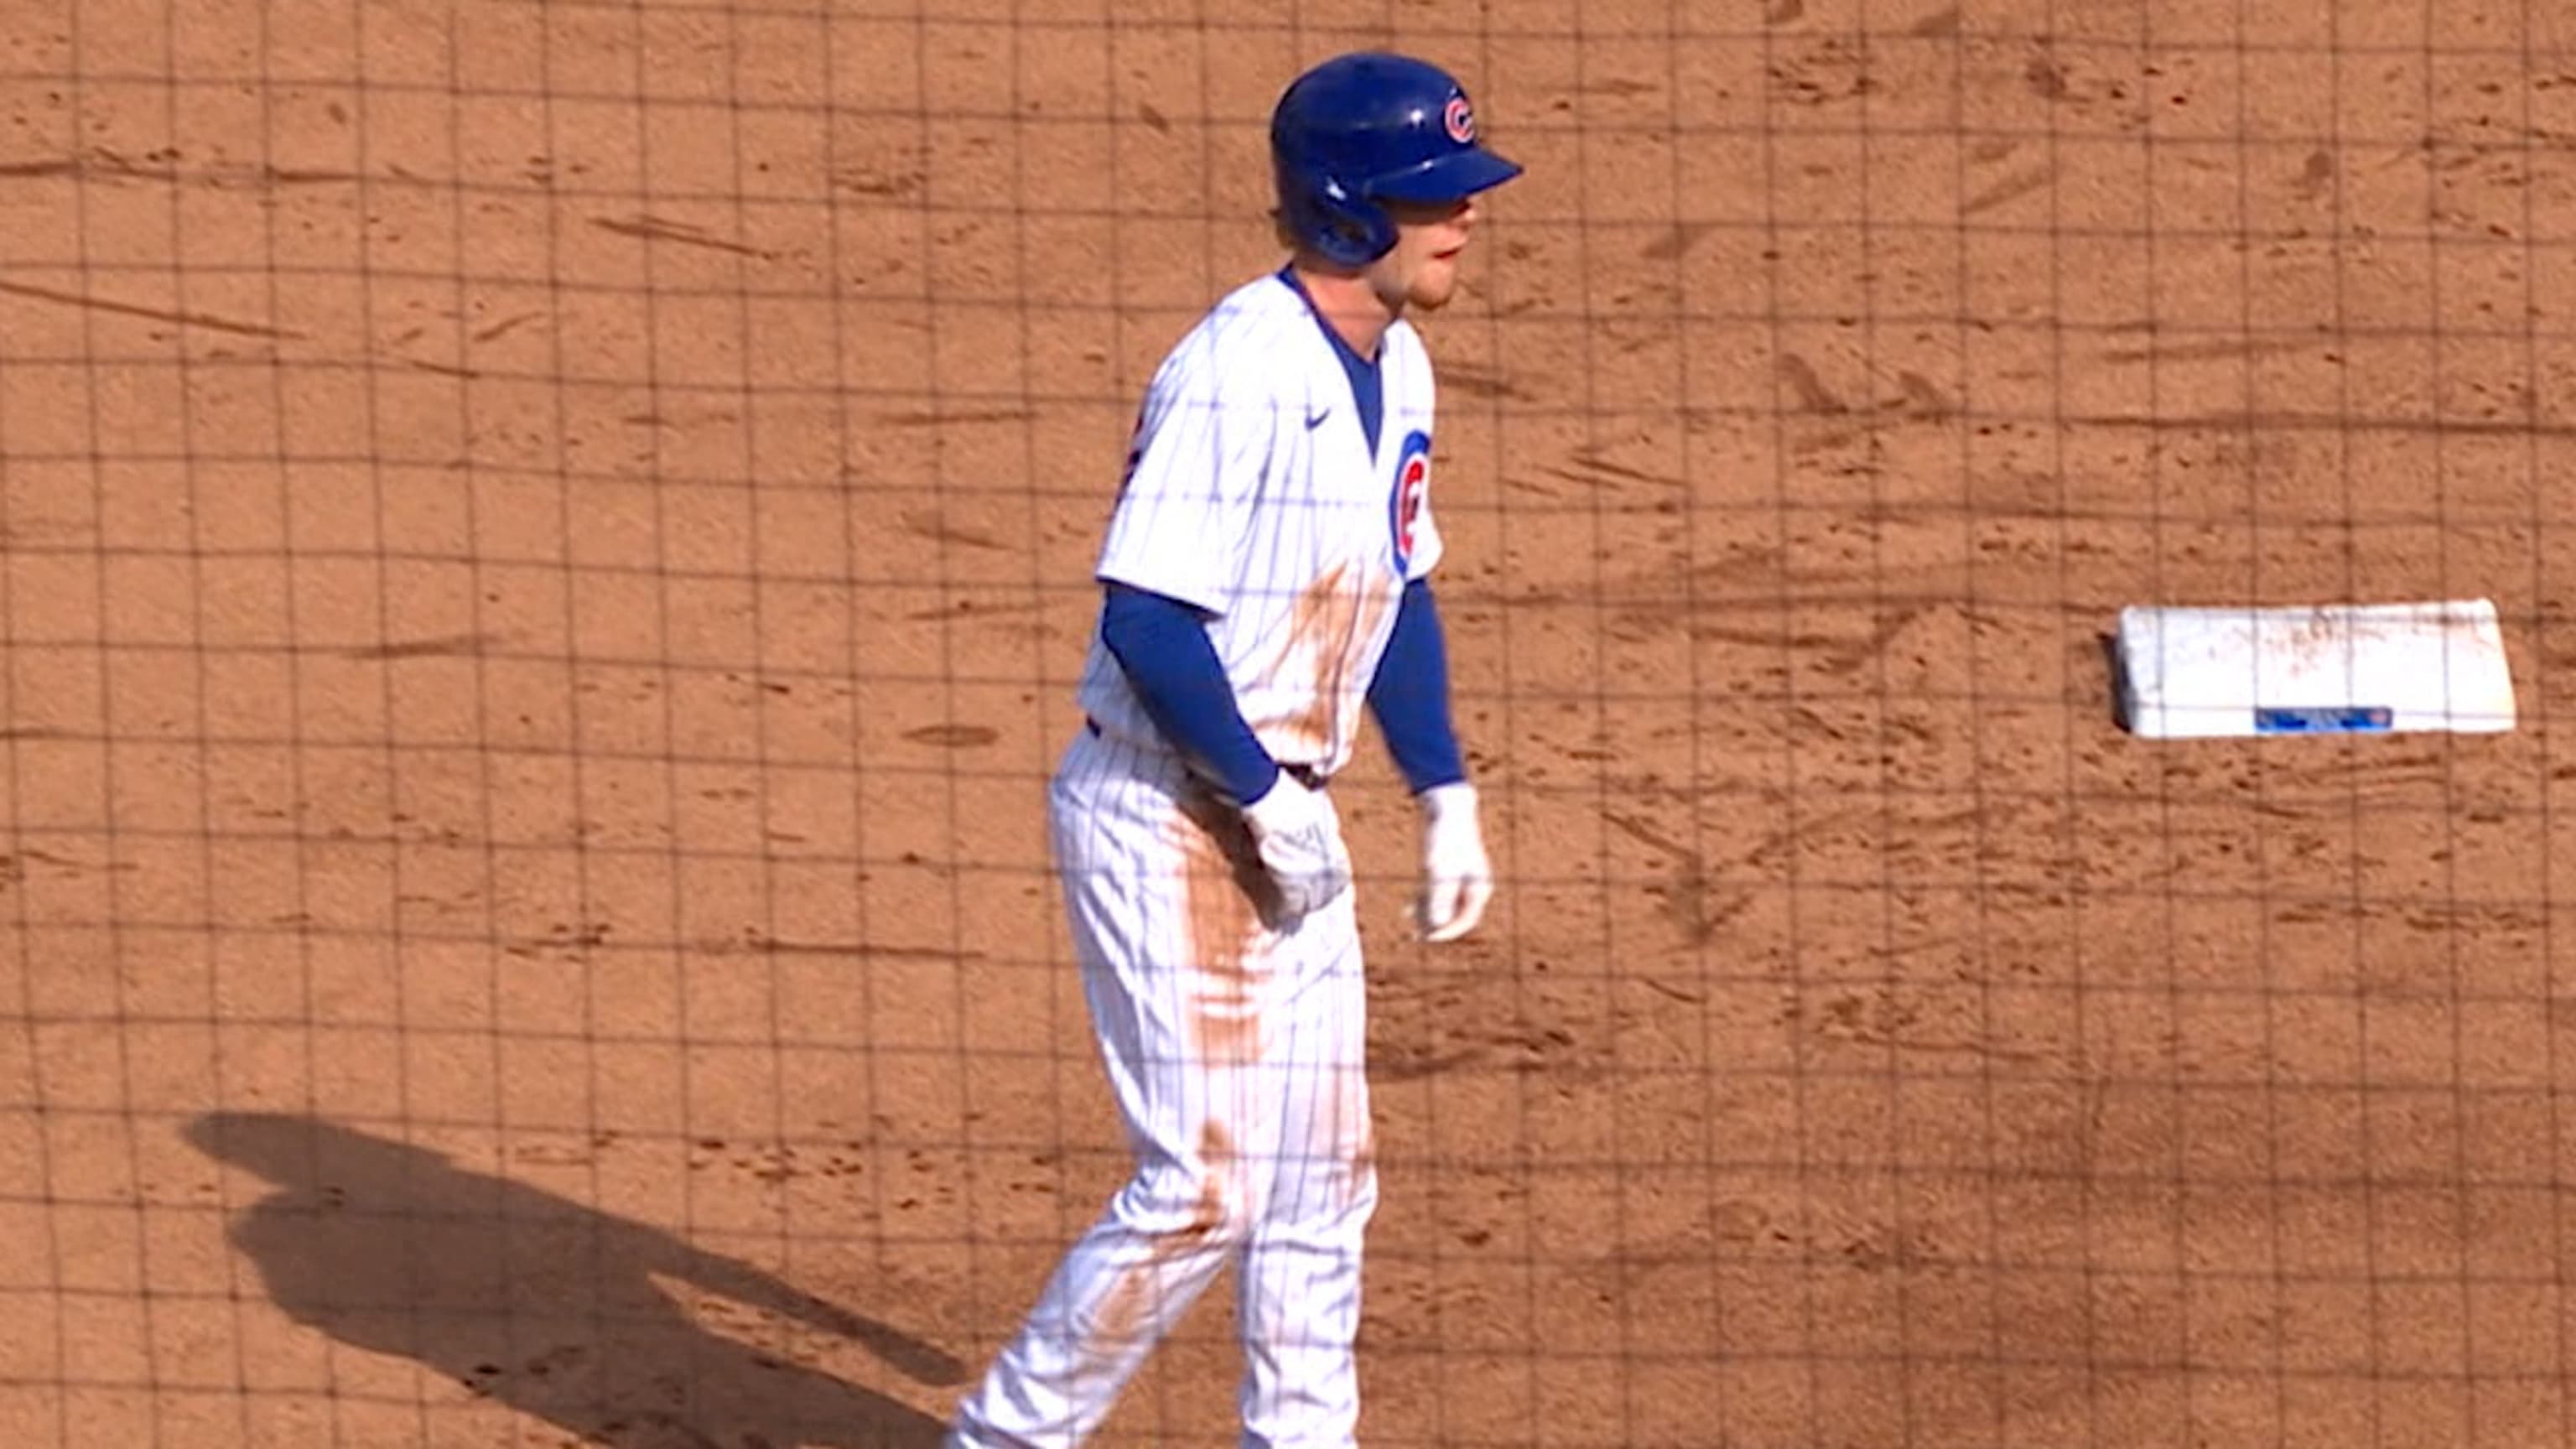 First look at Swanson and Bellinger in Cubs gear! : r/CHICubs